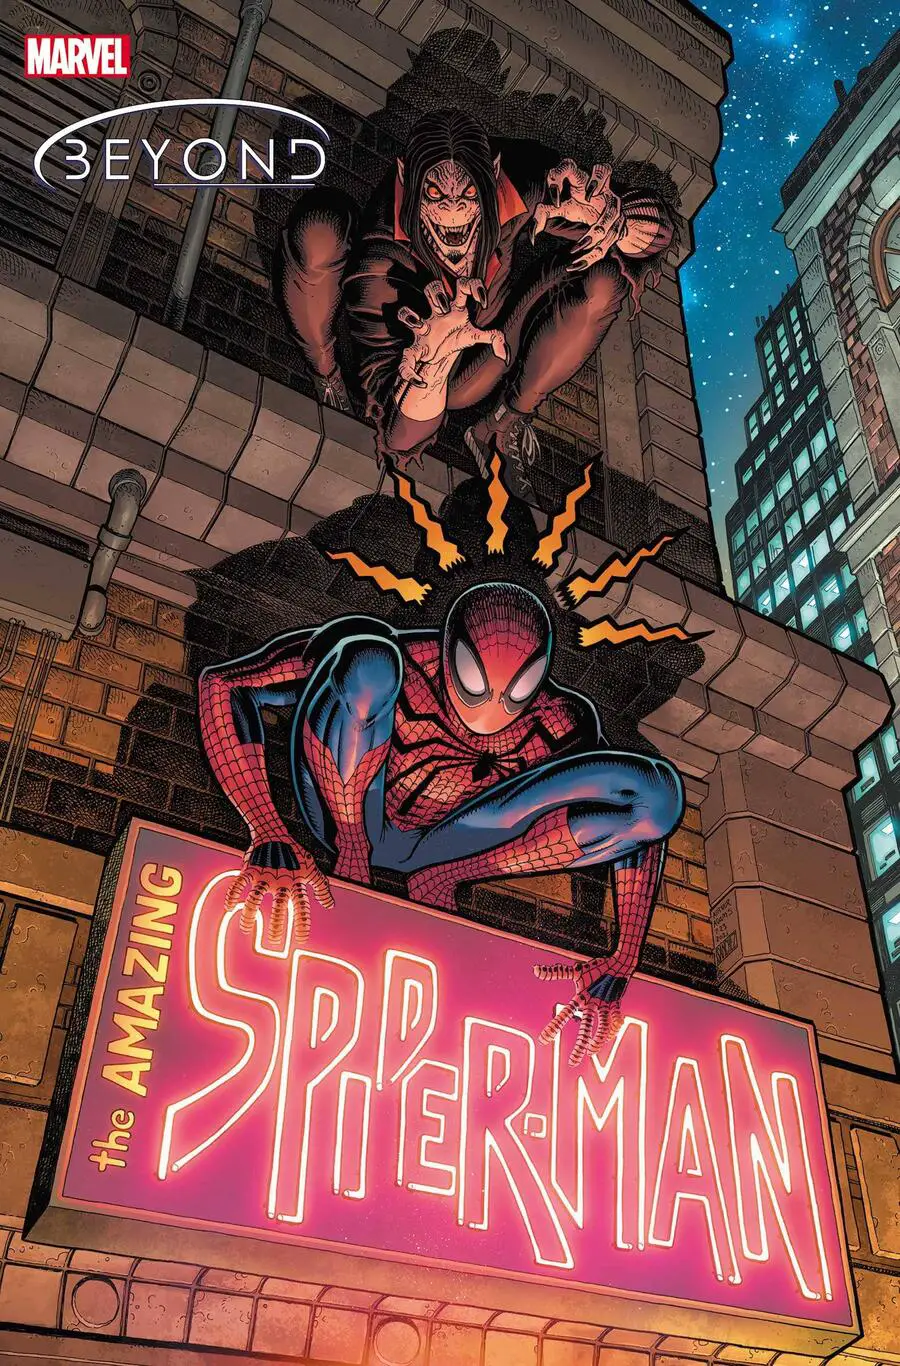 AMAZING SPIDER-MAN #78 cover by Arthur Adams, FCBD lead up to this